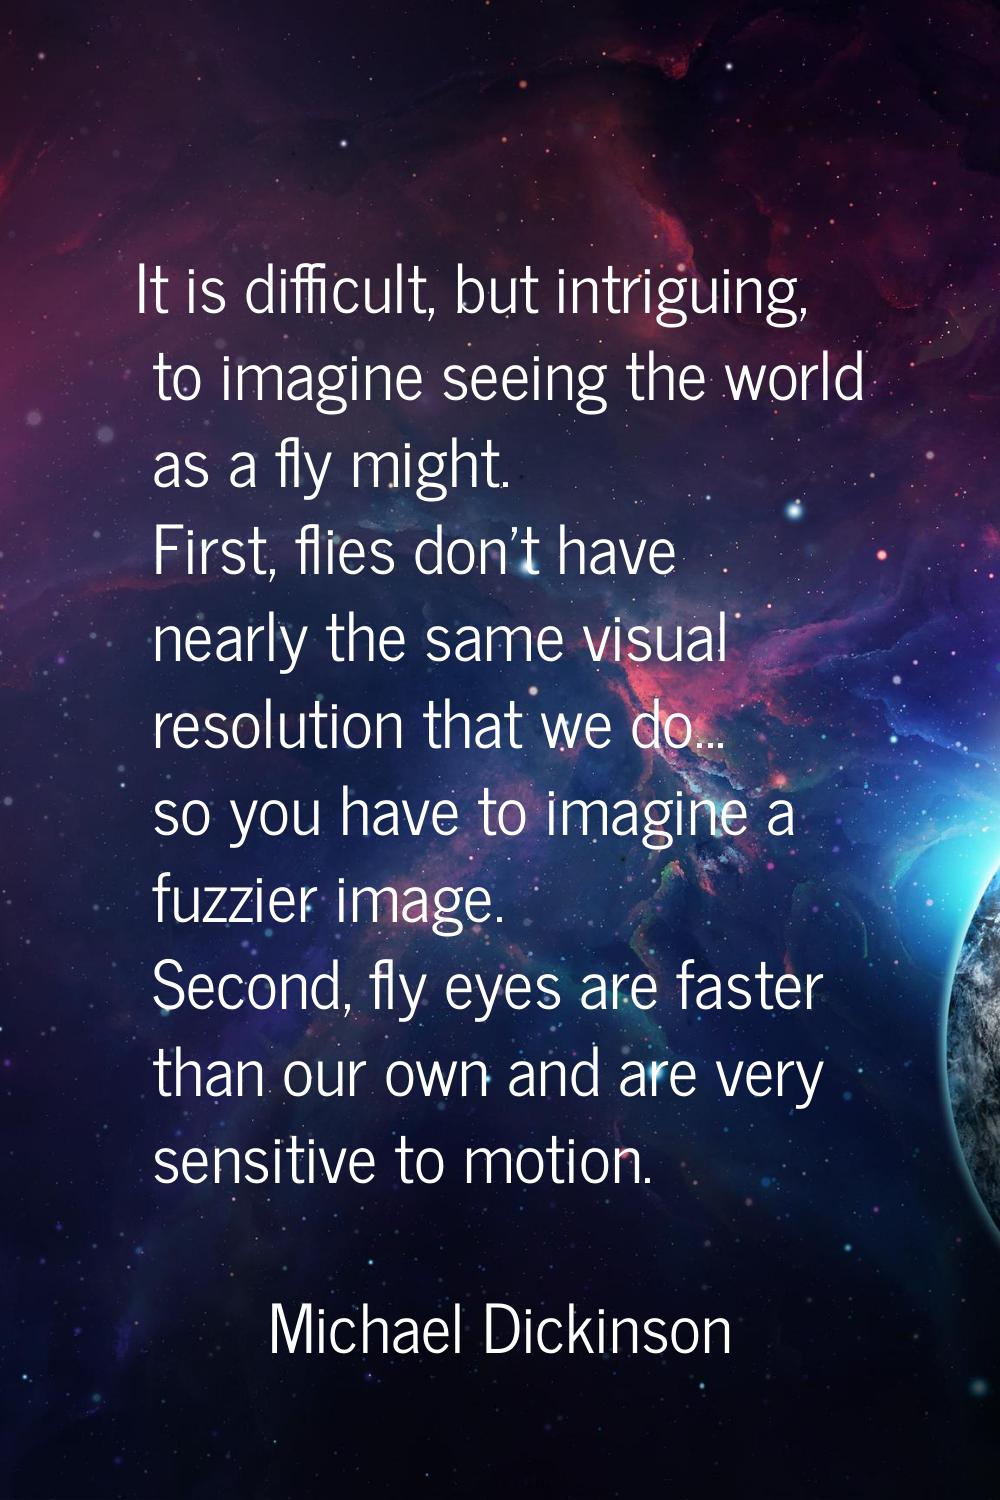 It is difficult, but intriguing, to imagine seeing the world as a fly might. First, flies don't hav